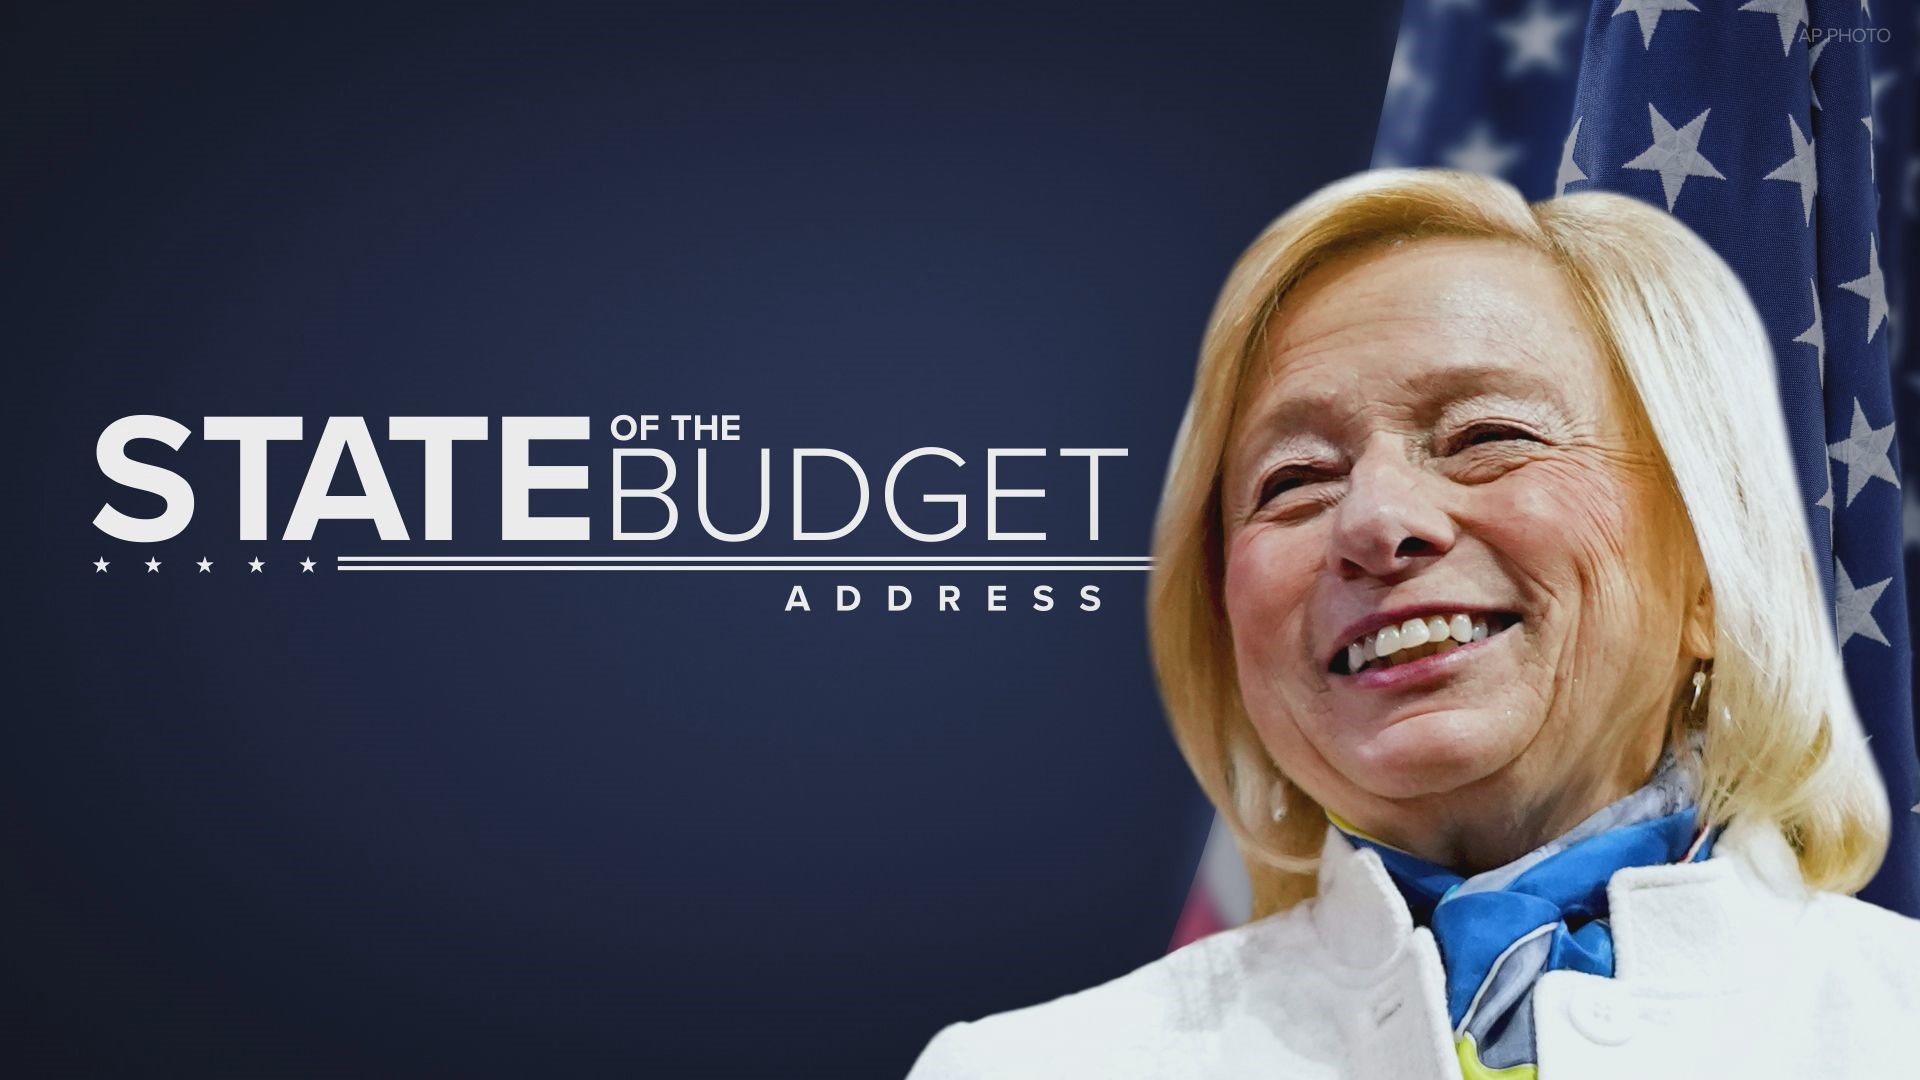 Maine Gov. Janet Mills said previously her plan would not raise taxes or use money out of the state's $900 million rainy-day fund.